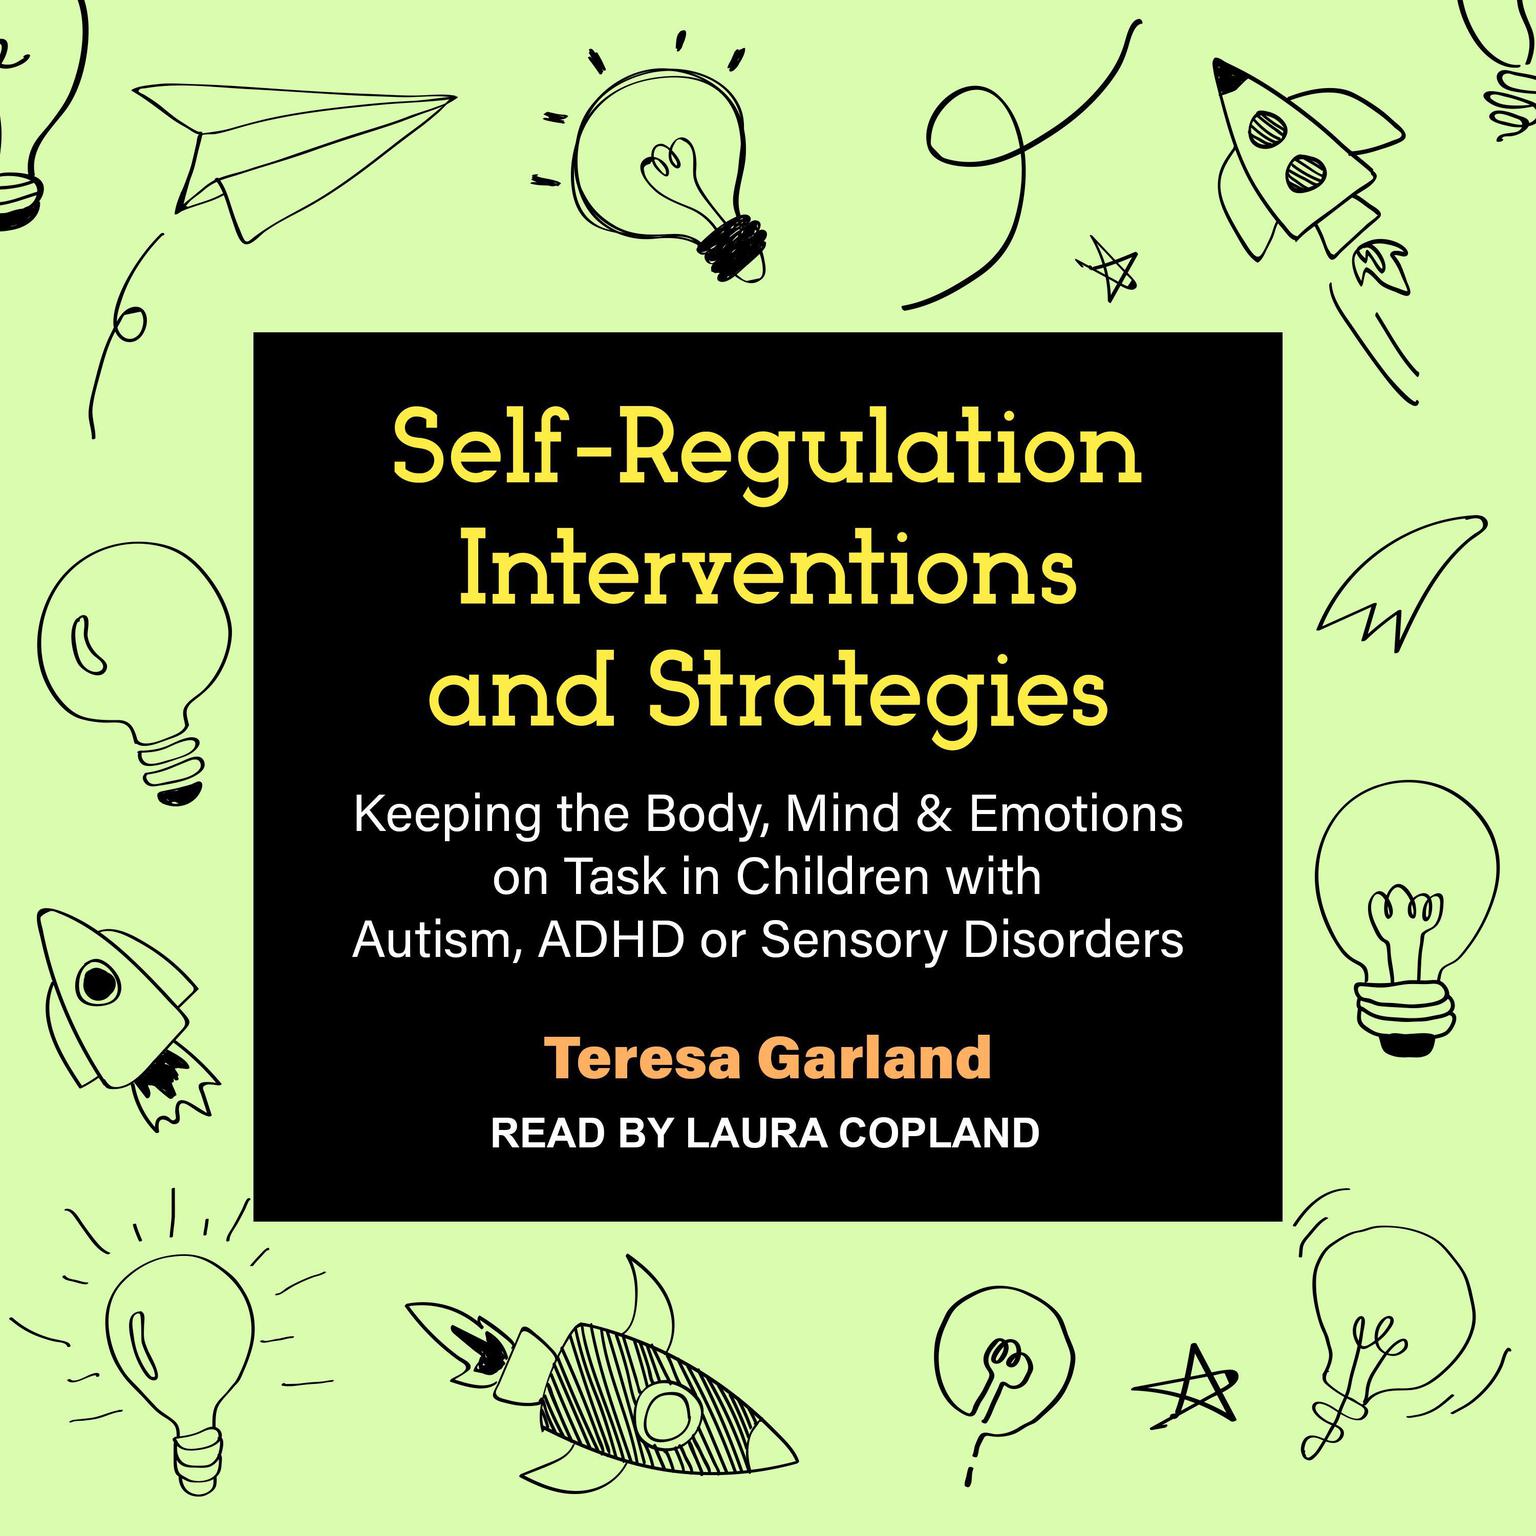 Self-Regulation Interventions and Strategies: Keeping the Body, Mind & Emotions on Task in Children with Autism, ADHD or Sensory Disorders Audiobook, by Teresa Garland